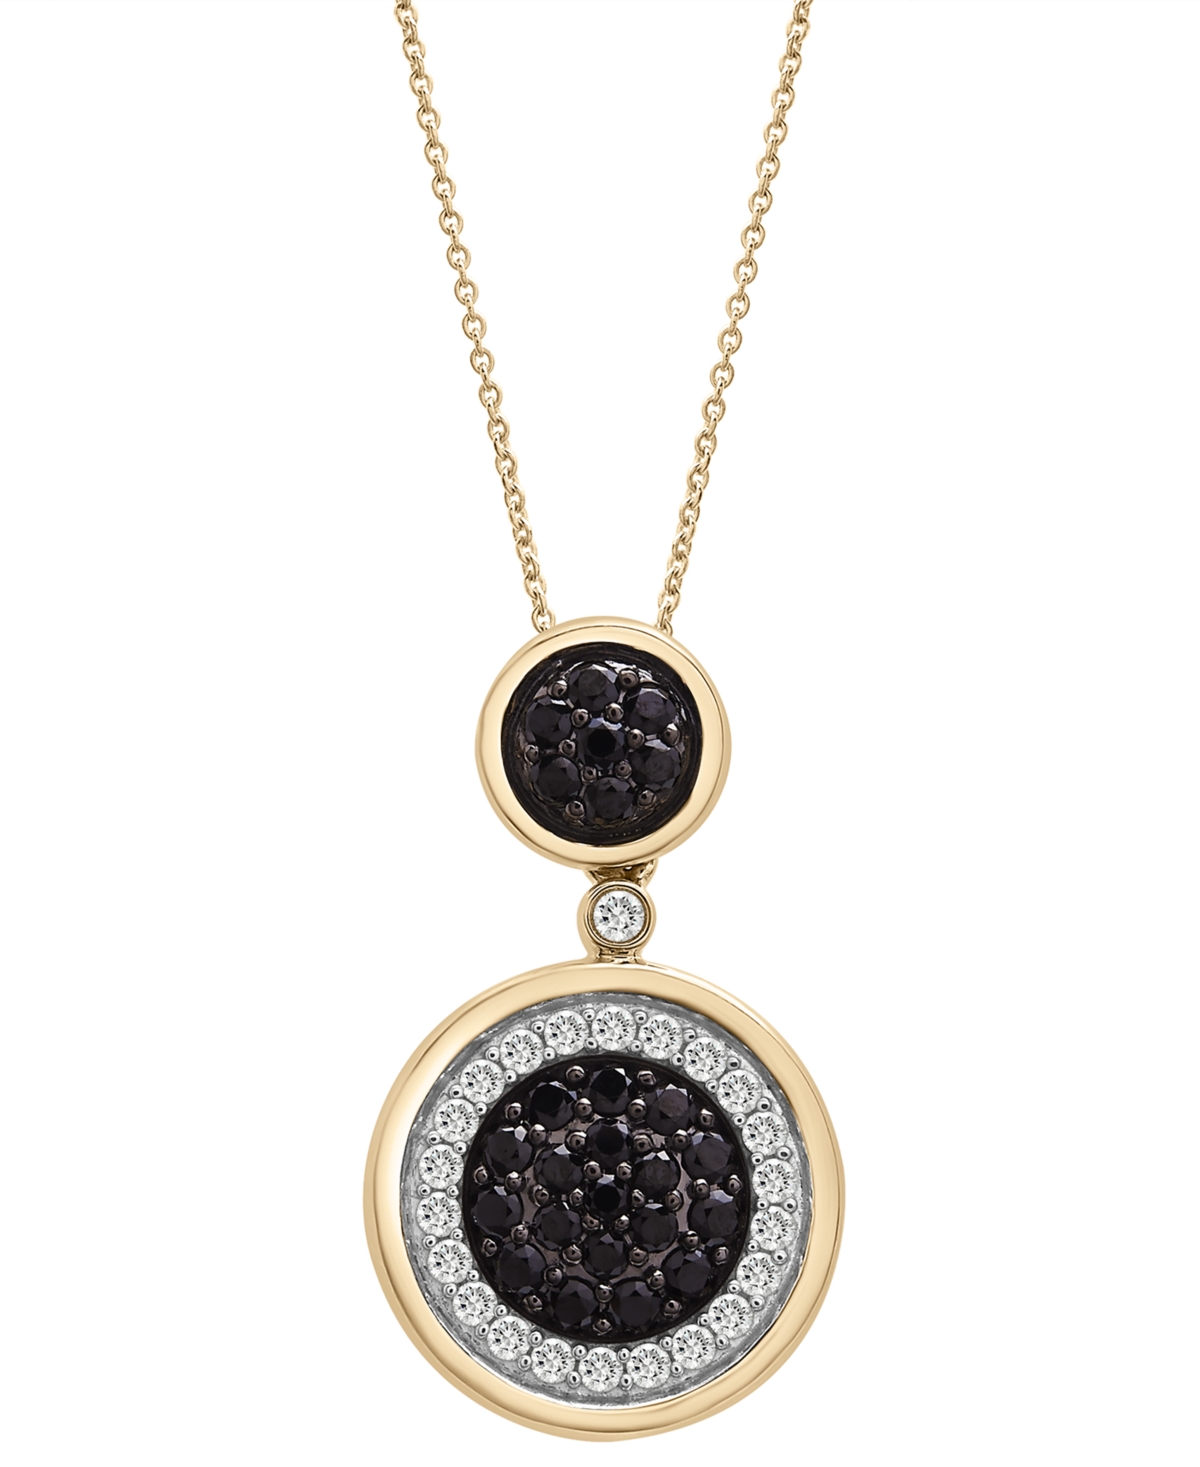 Black Diamond (1/2 ct. t.w.) & White Diamond (1/4 ct. t.w.) Double Circle Pendant Necklace in 14k Gold, 16" + 4" extender, Created for